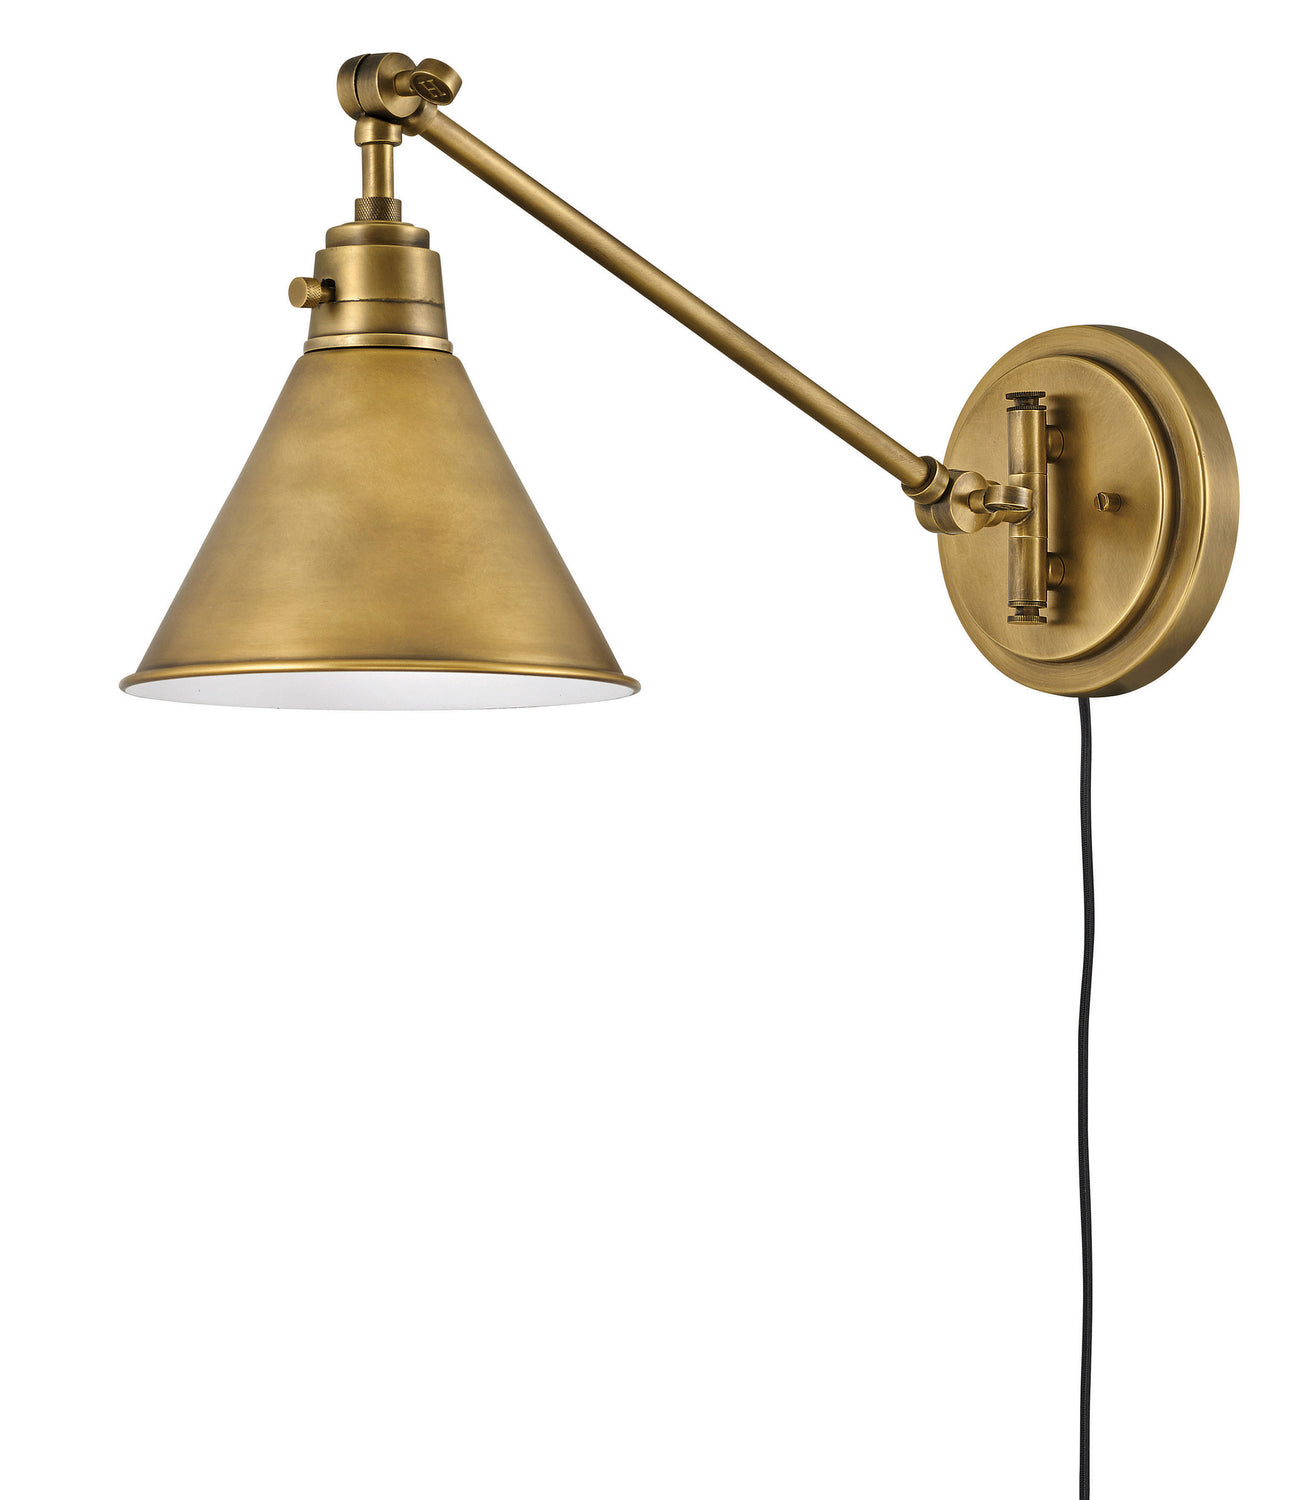 Hinkley - 3690HB - LED Wall Sconce - Arti - Heritage Brass